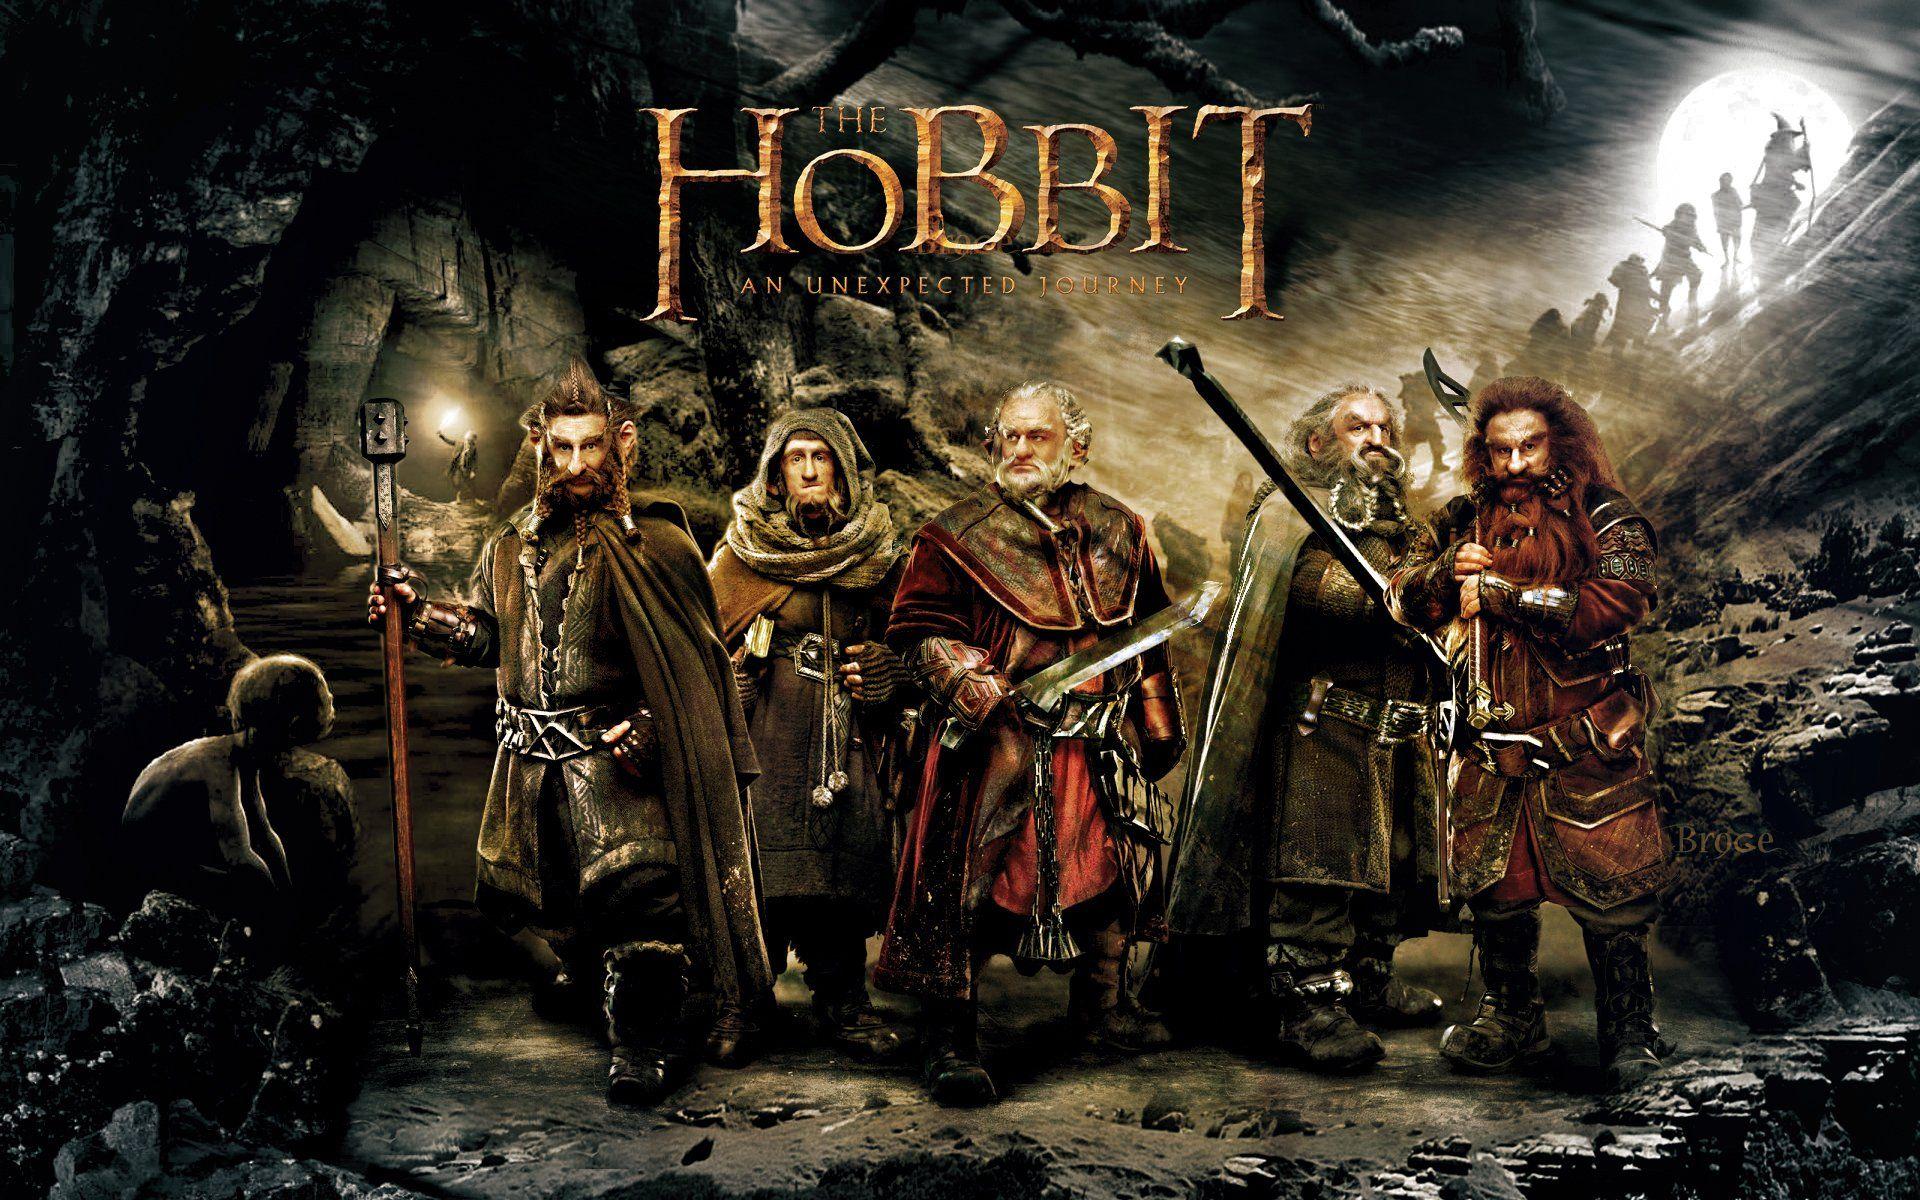 The Hobbit: An Unexpected Journey HD Wallpaper. Background